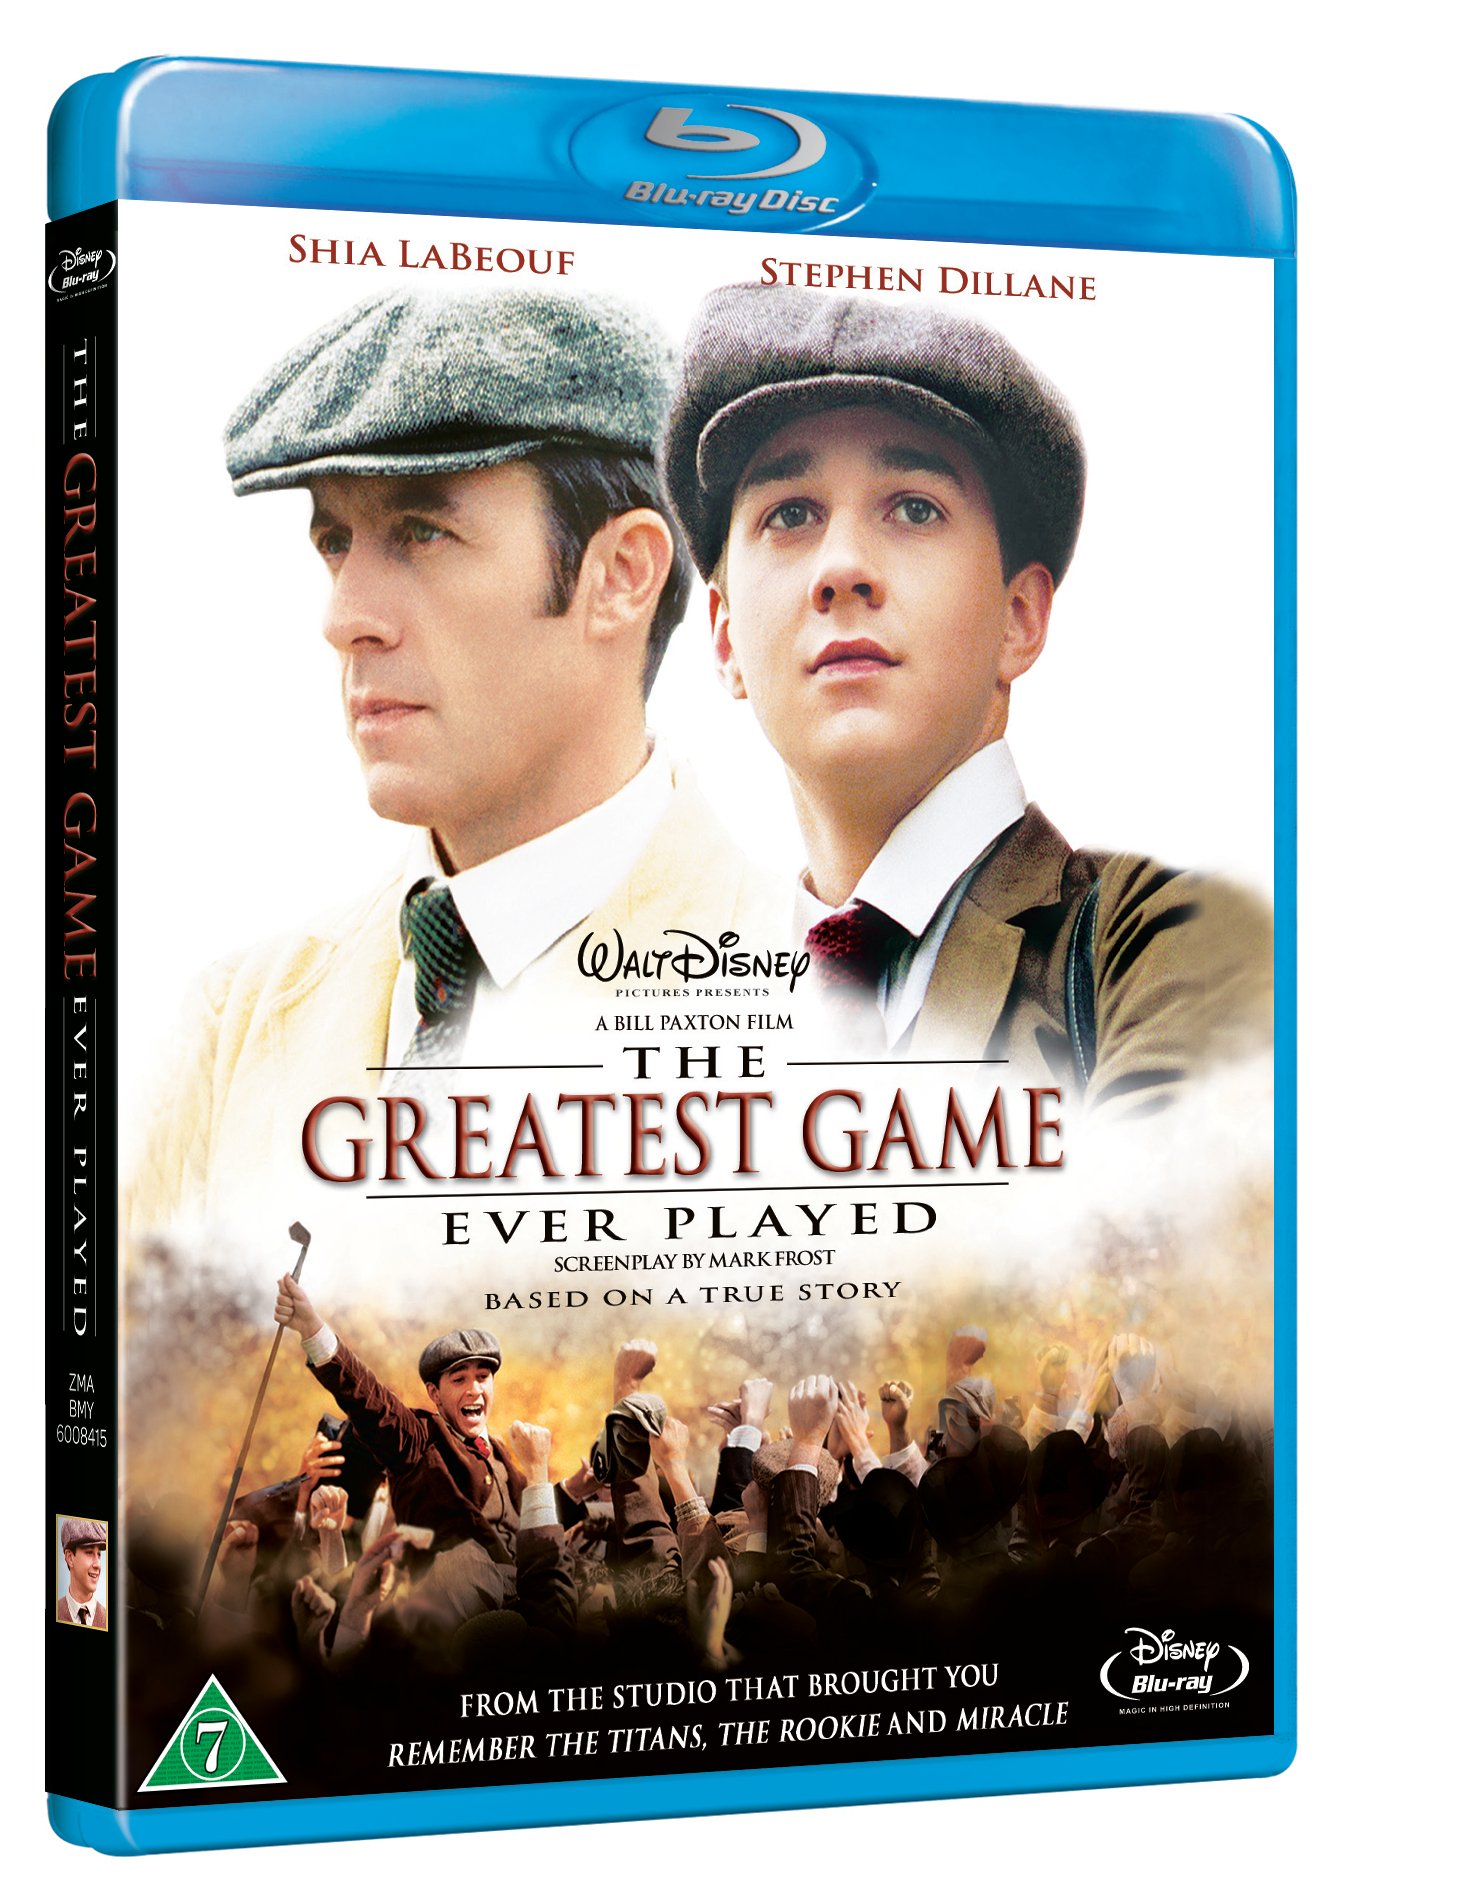 Greatest Game Ever Played - Blu Ray